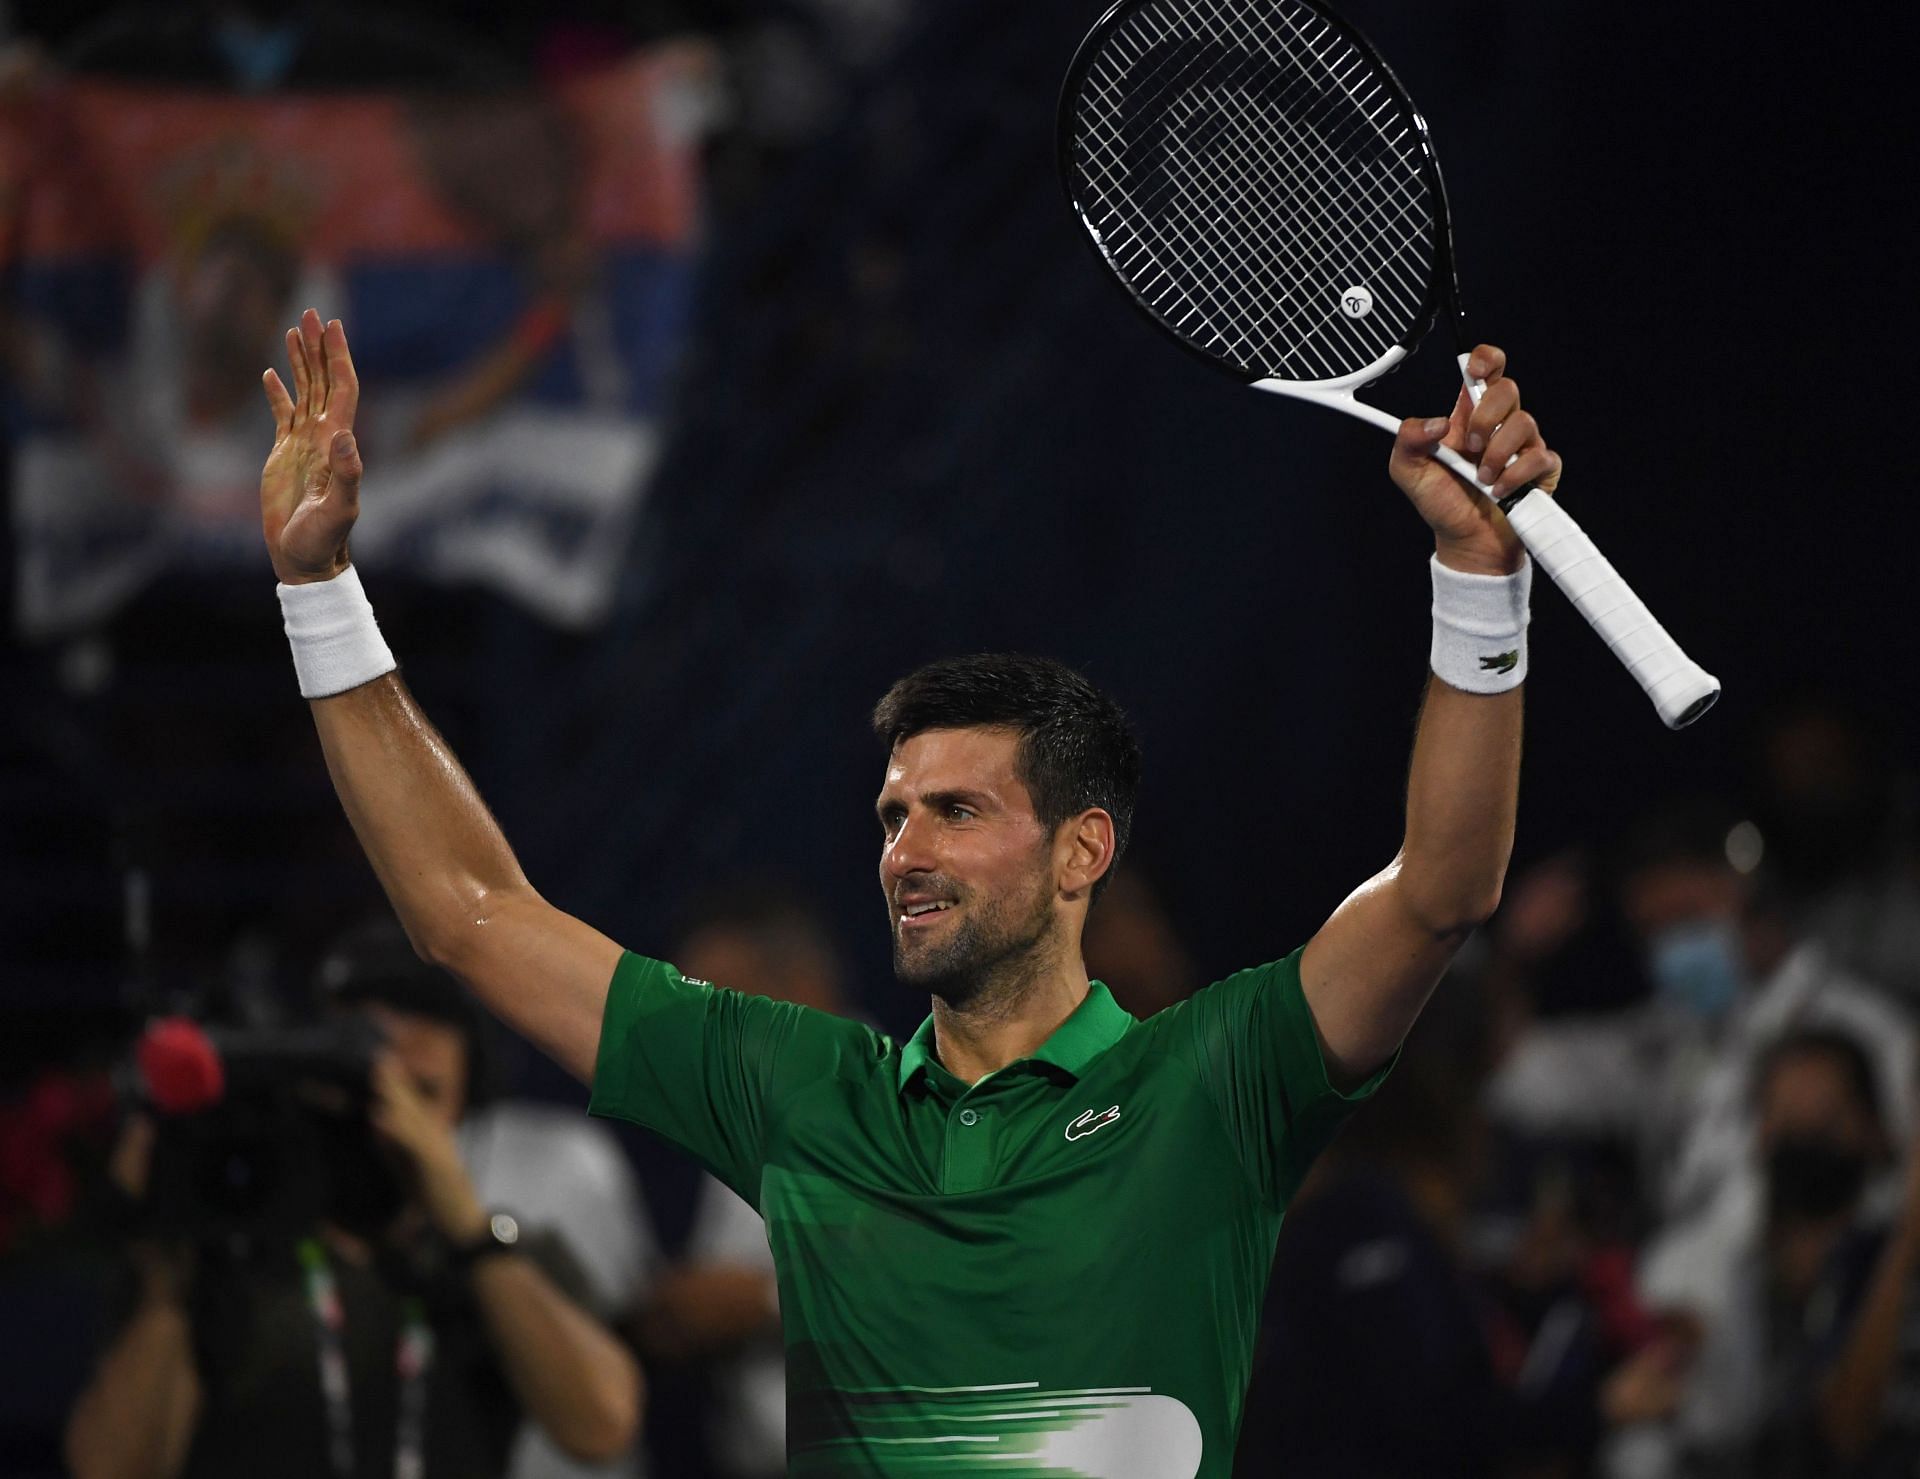 Novak Djokovic has completed seven years as a World No. 1